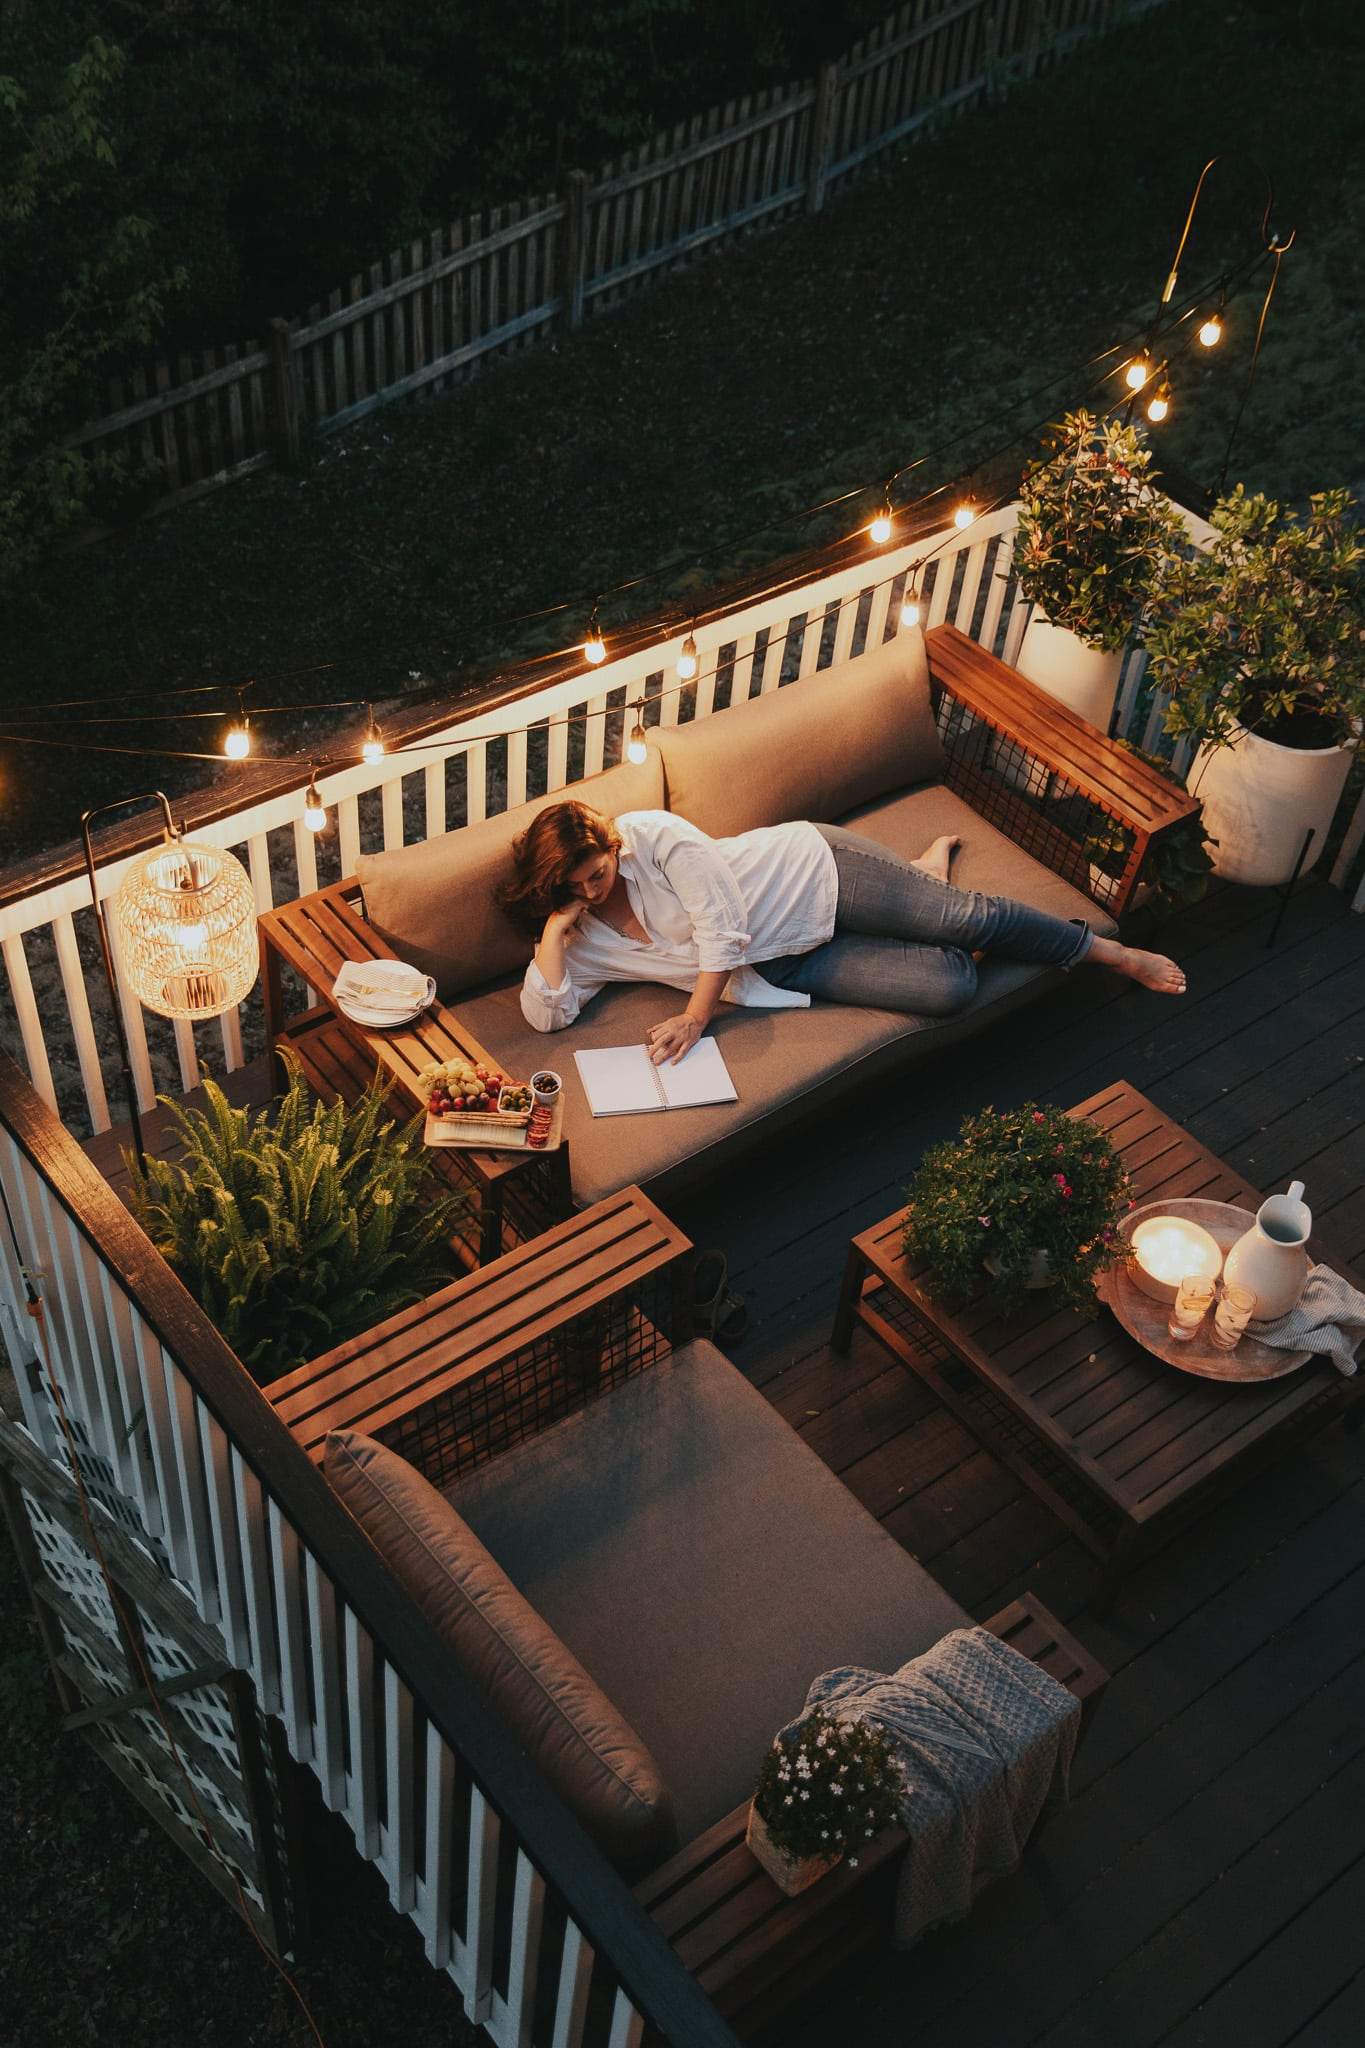 Creative Ways to Spruce Up Your Deck with Decor